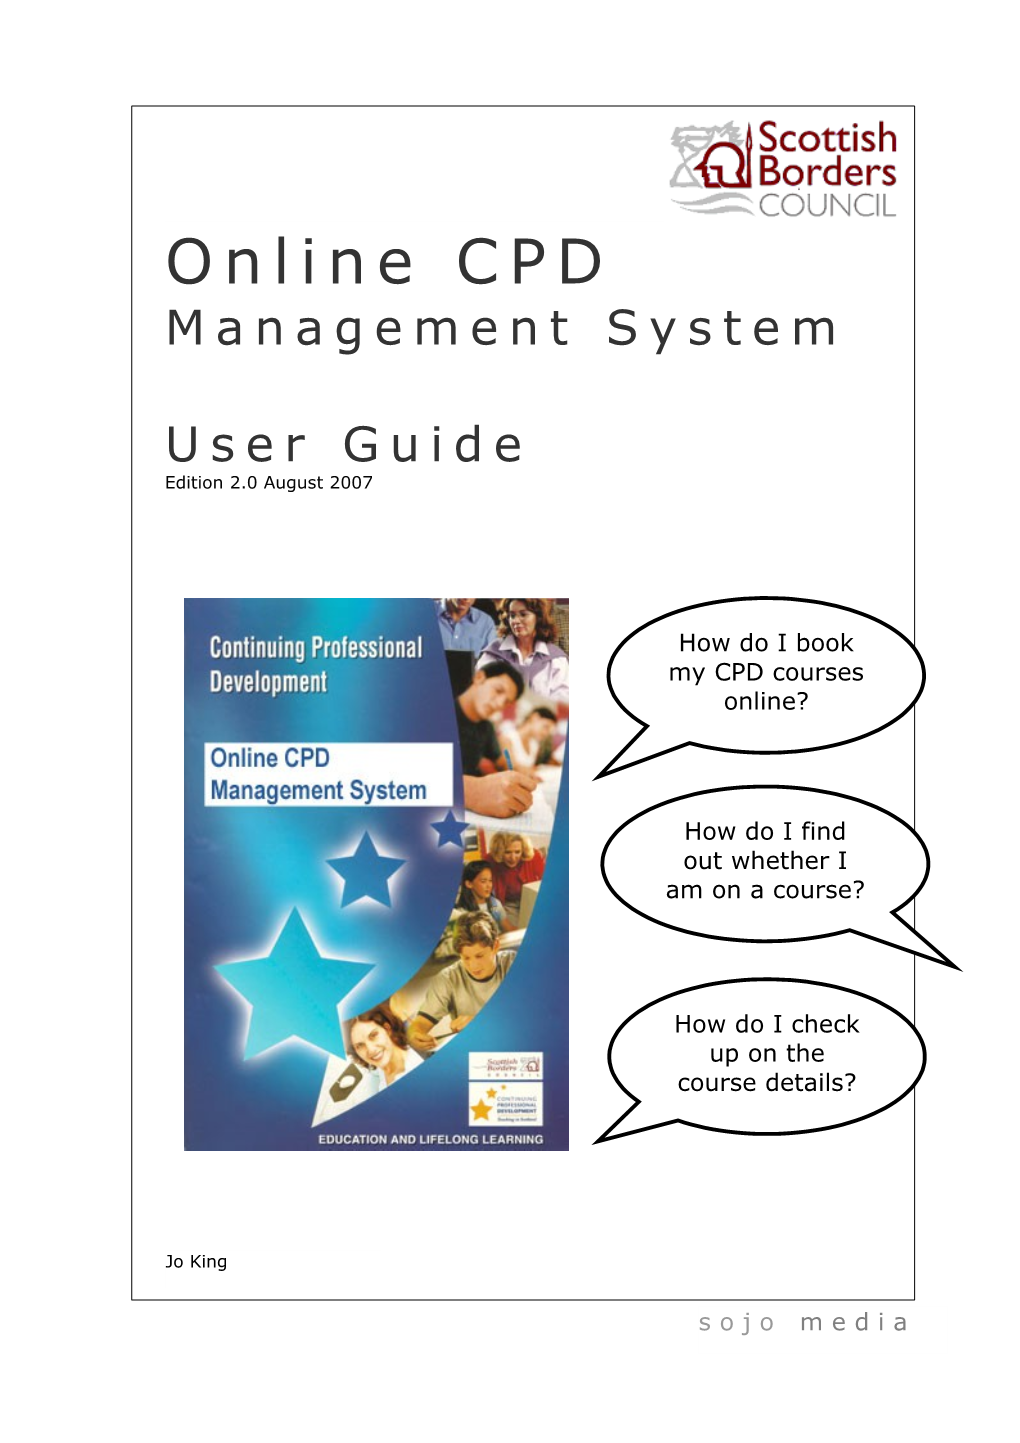 Online CPD User Guide